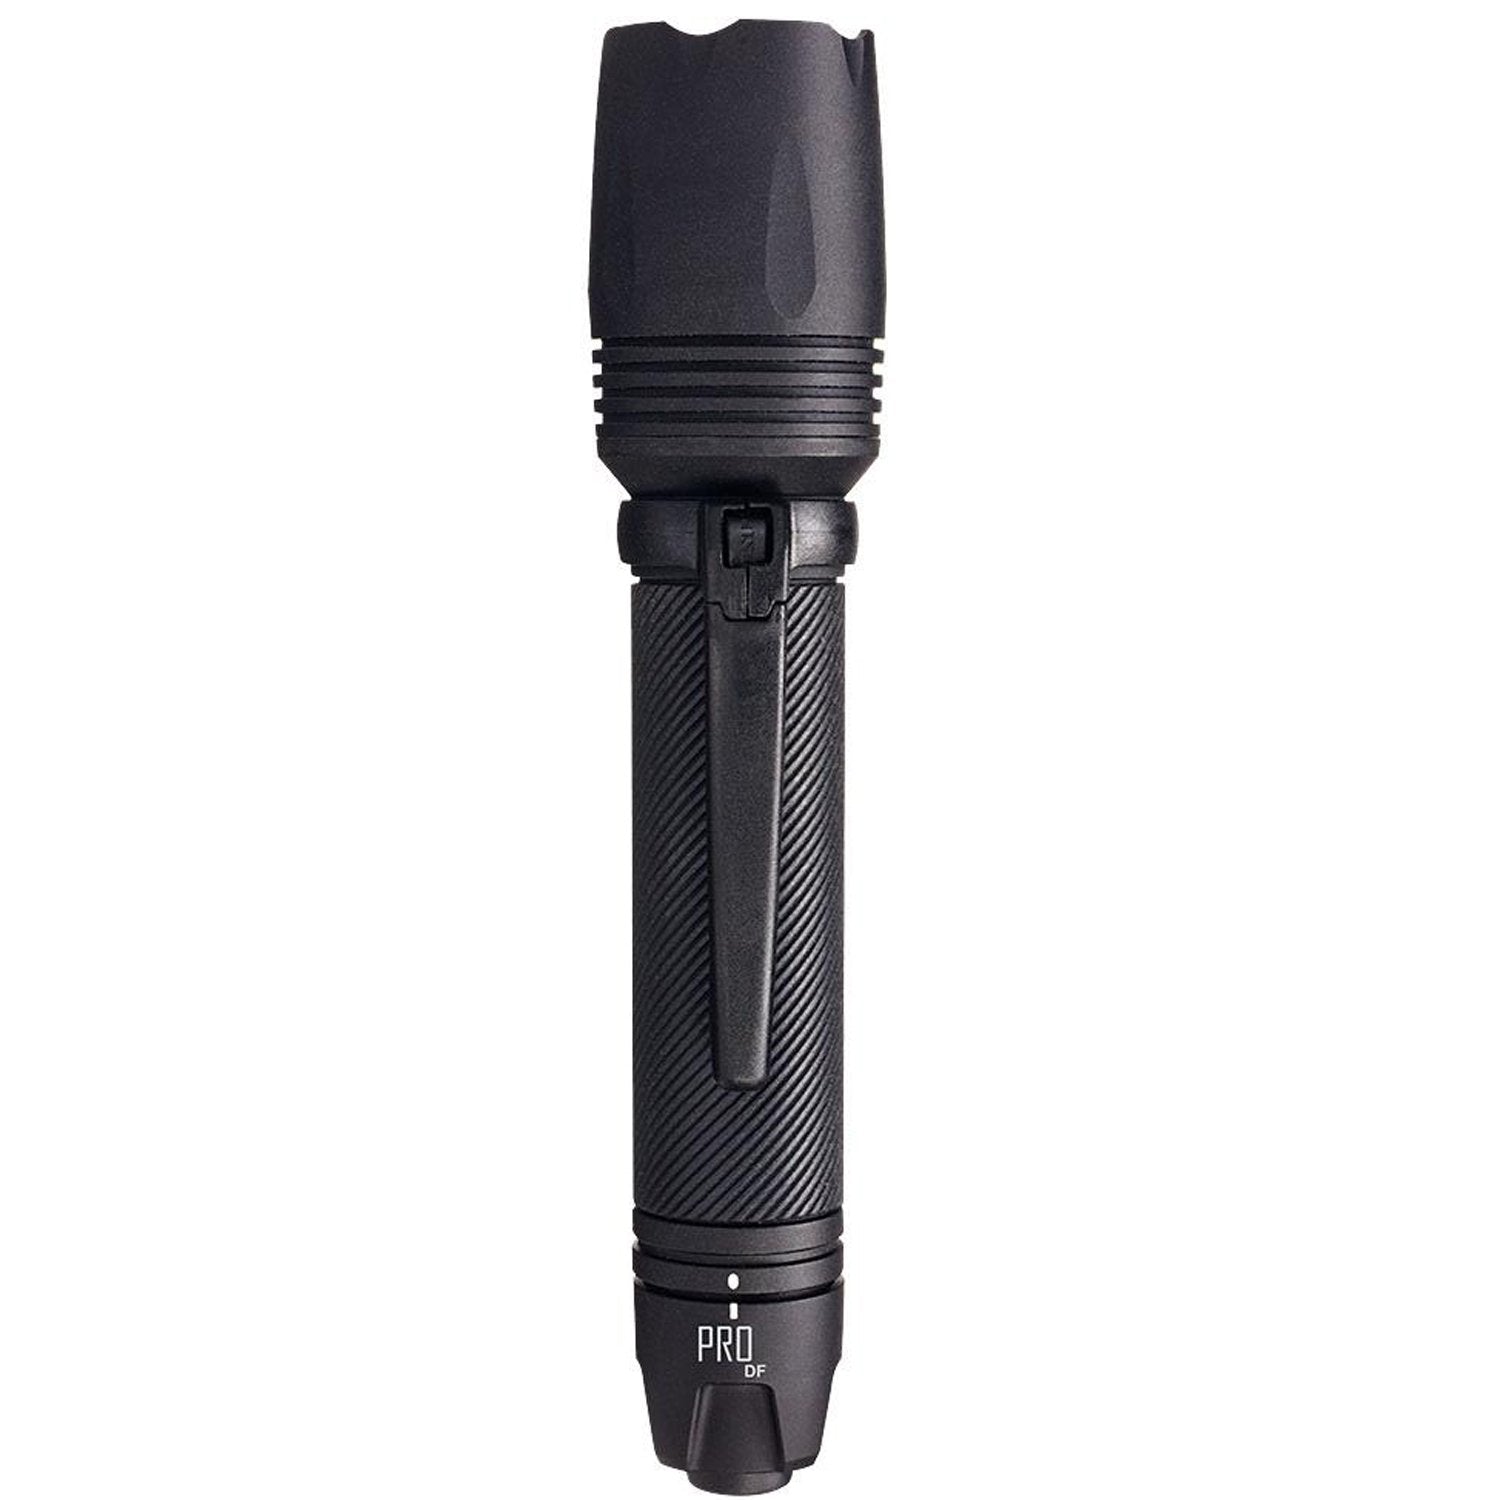 ASP Pro DF 500 Lumens Rechargeable LED Flashlight Flashlights and Lighting ASP Tactical Gear Supplier Tactical Distributors Australia